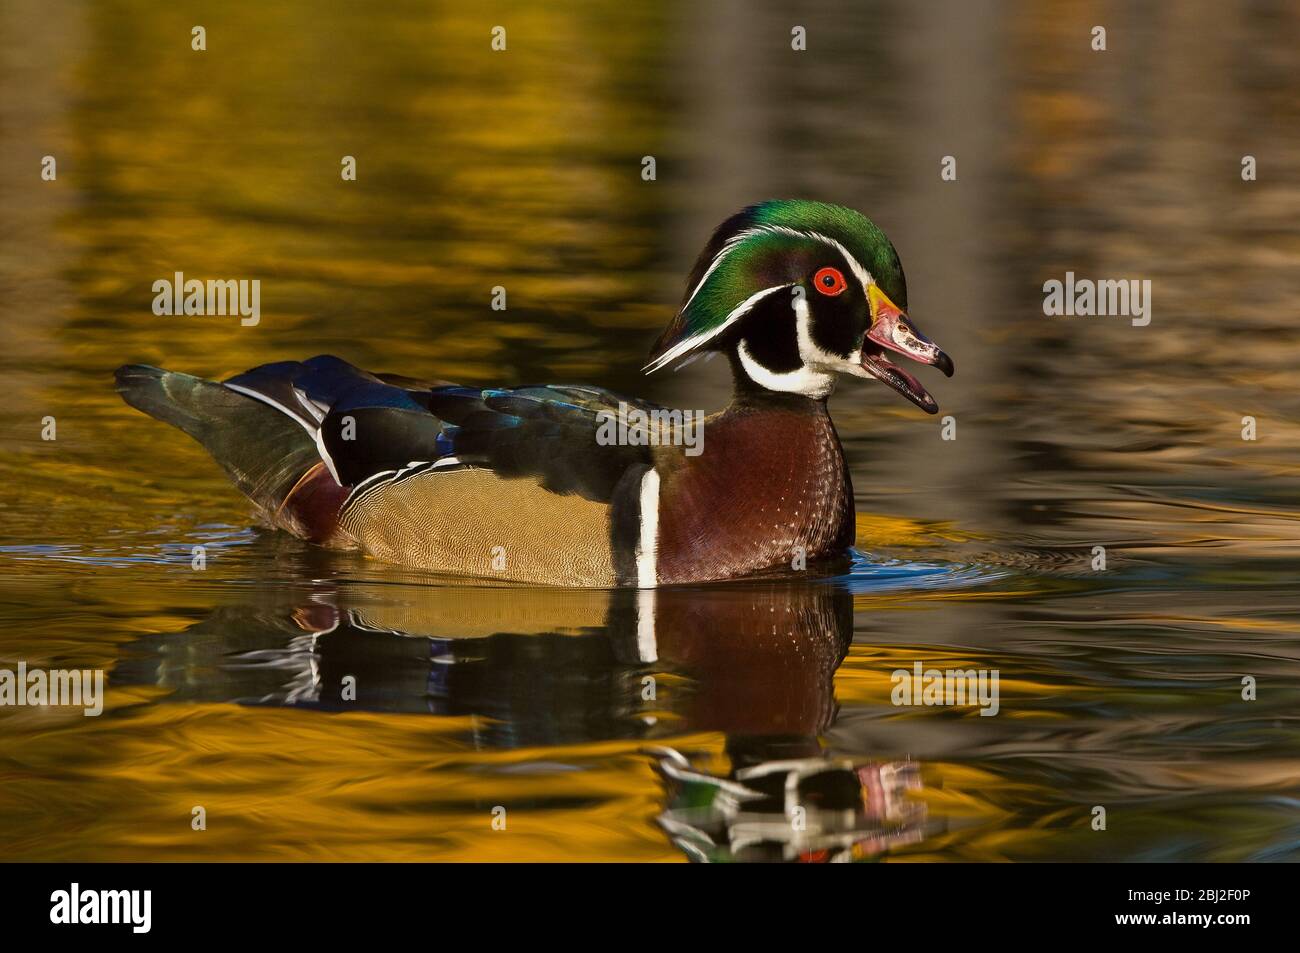 Colorful Wood Duck (Aix sponsa) portrait with reflection Stock Photo